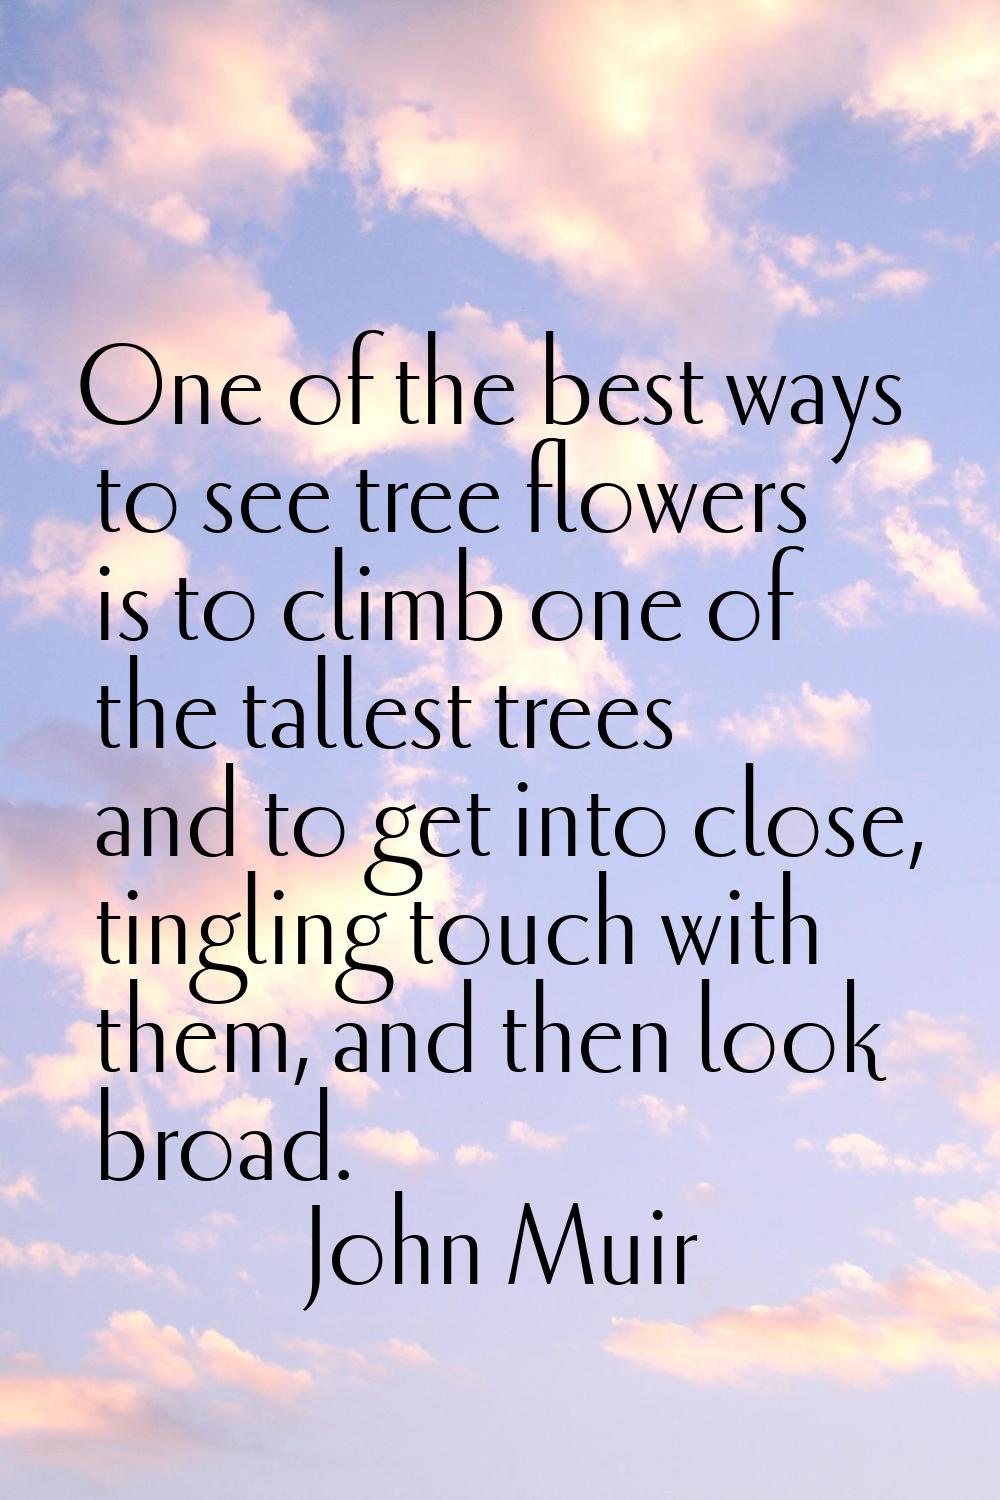 One of the best ways to see tree flowers is to climb one of the tallest trees and to get into close